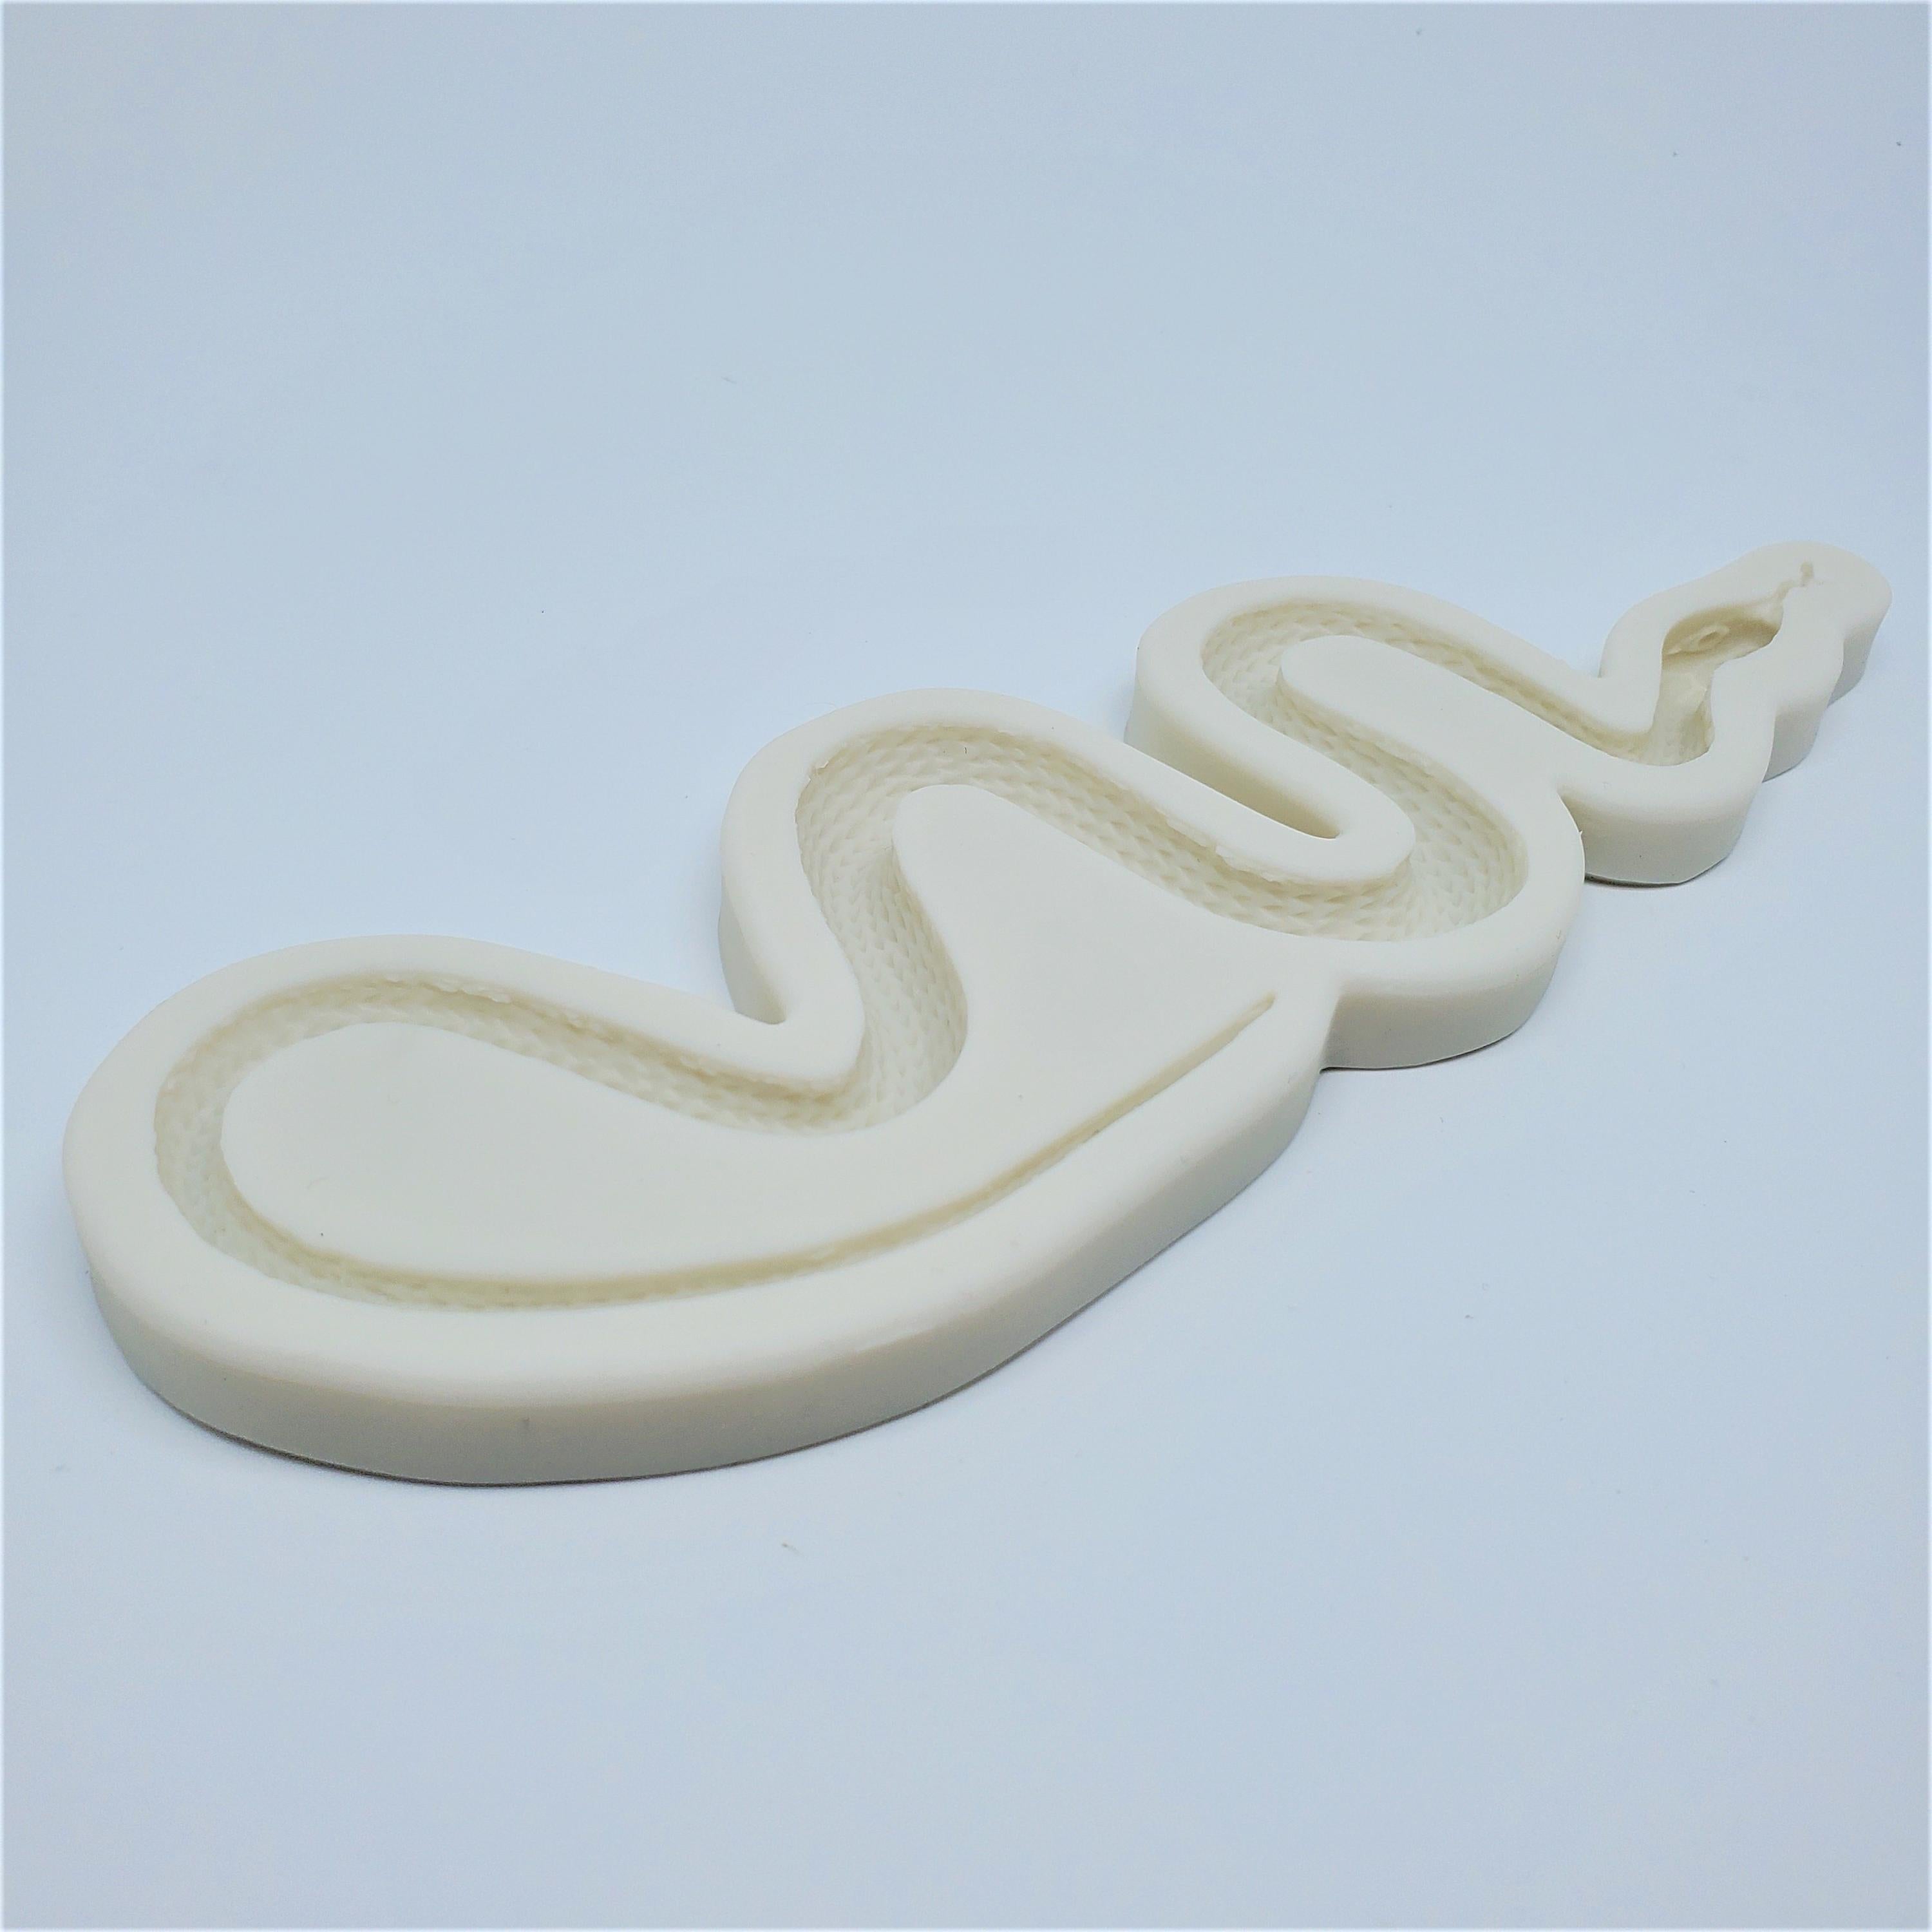 JX-LCLYL 4x Silicone Magic Bake Snakes Create Chape Nonstick Tray Baking  Mould Cake Mold - AliExpress